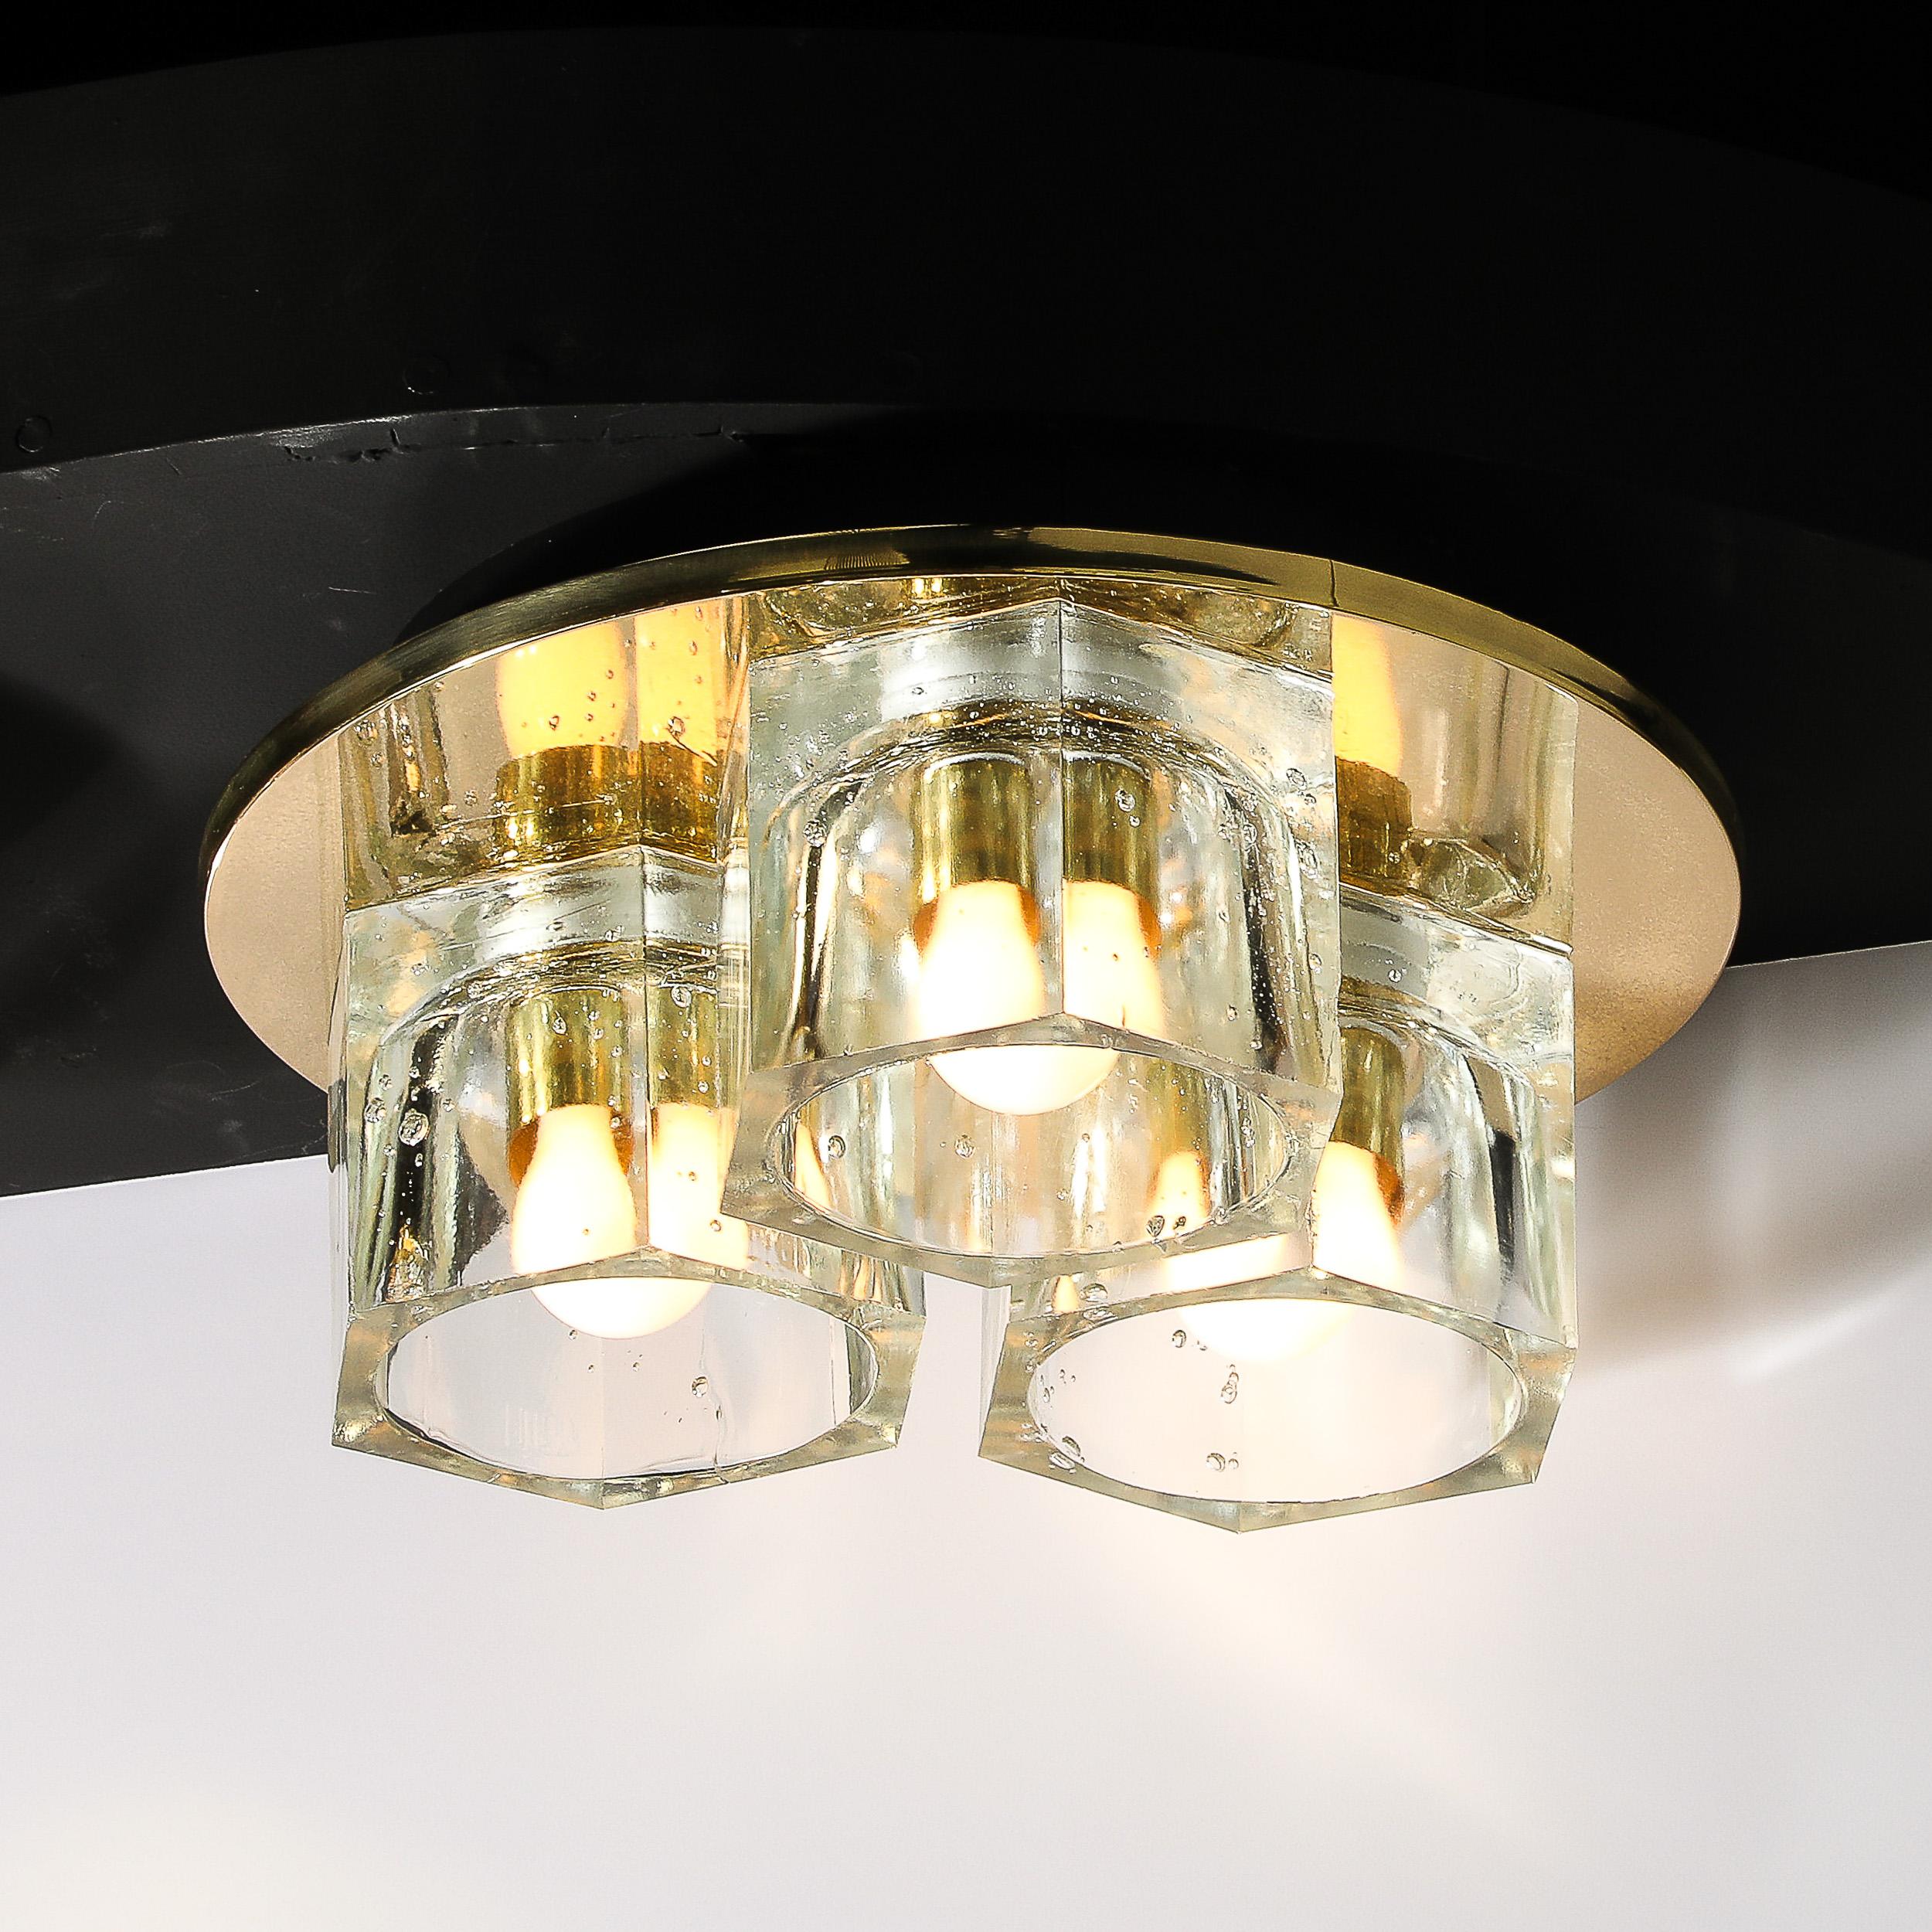 Mid-Century Hexagonal Glass Flush Mount Chandelier in Brass by Lightolier In Excellent Condition For Sale In New York, NY